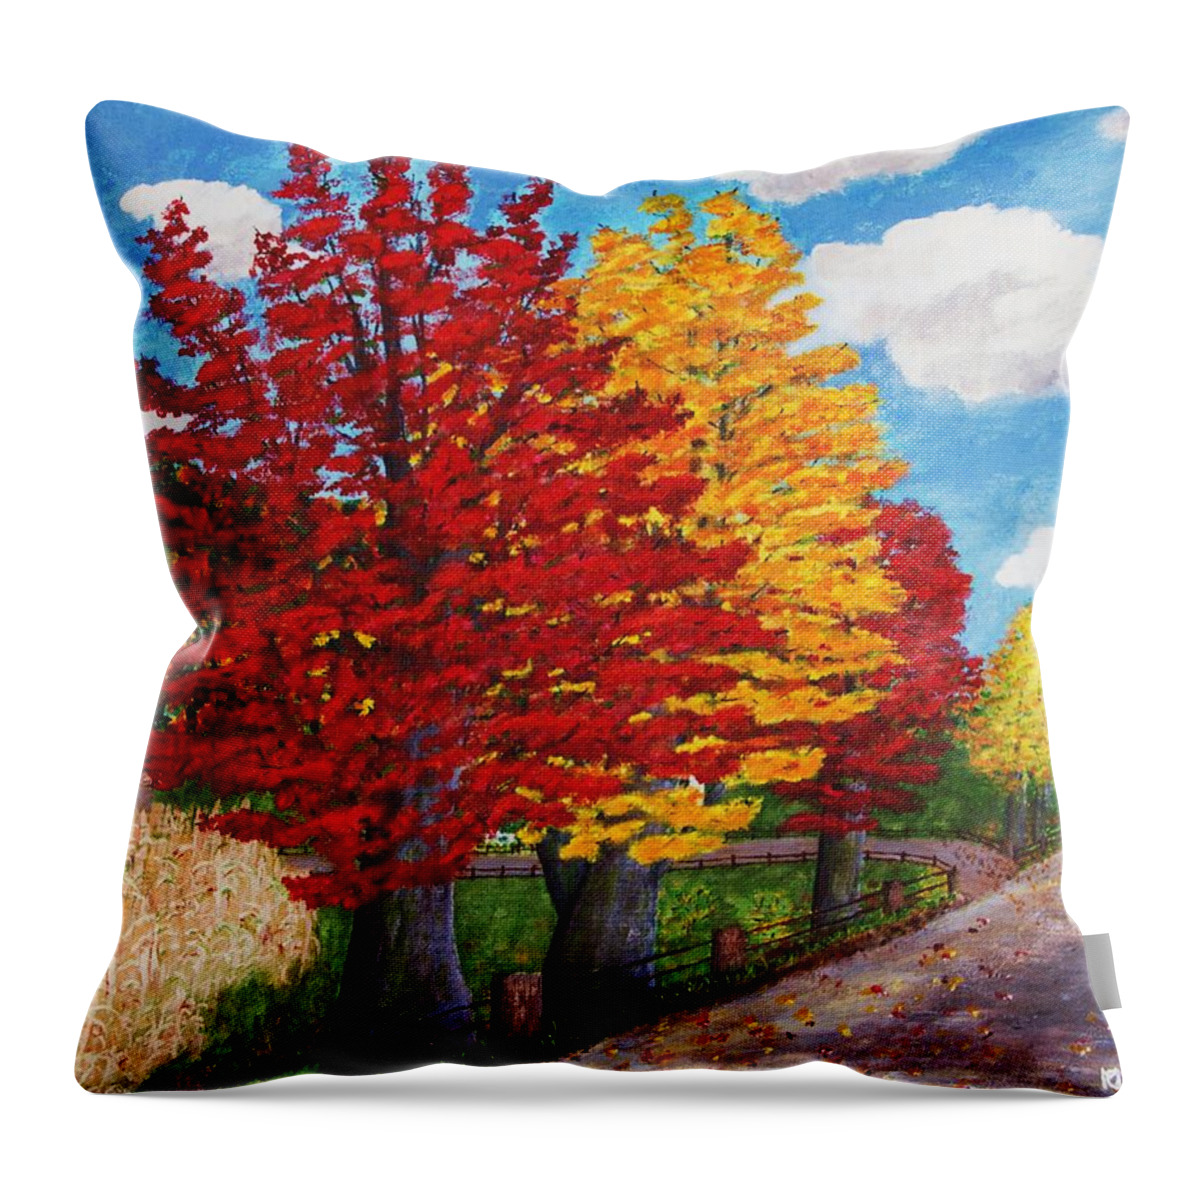 Autumn Landscape Painting Throw Pillow featuring the painting An Autumn Drive by Cynthia Morgan